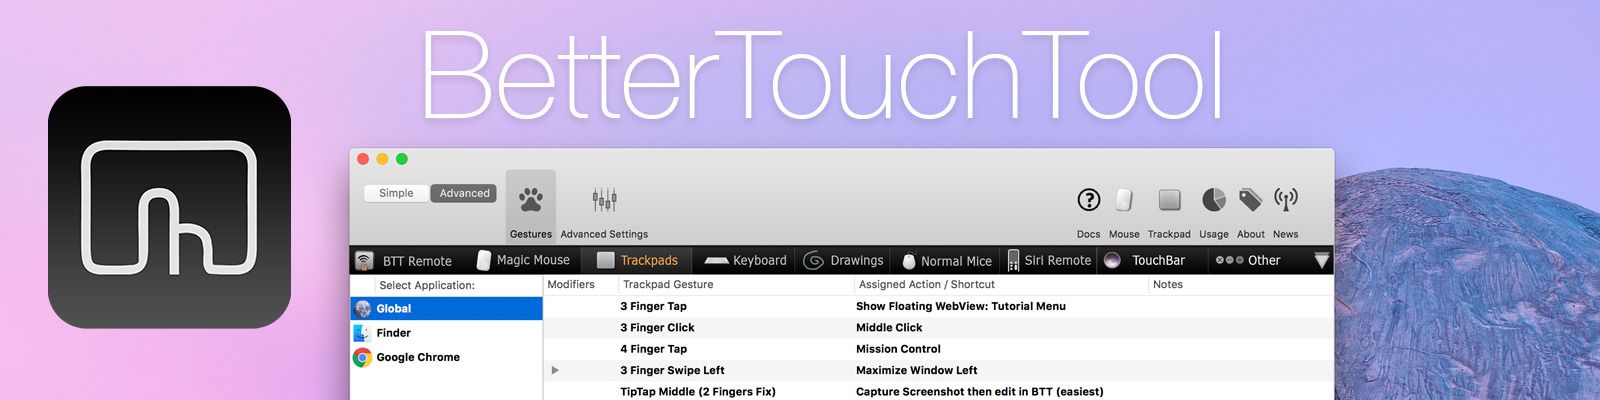 seanwes bettertouchtool